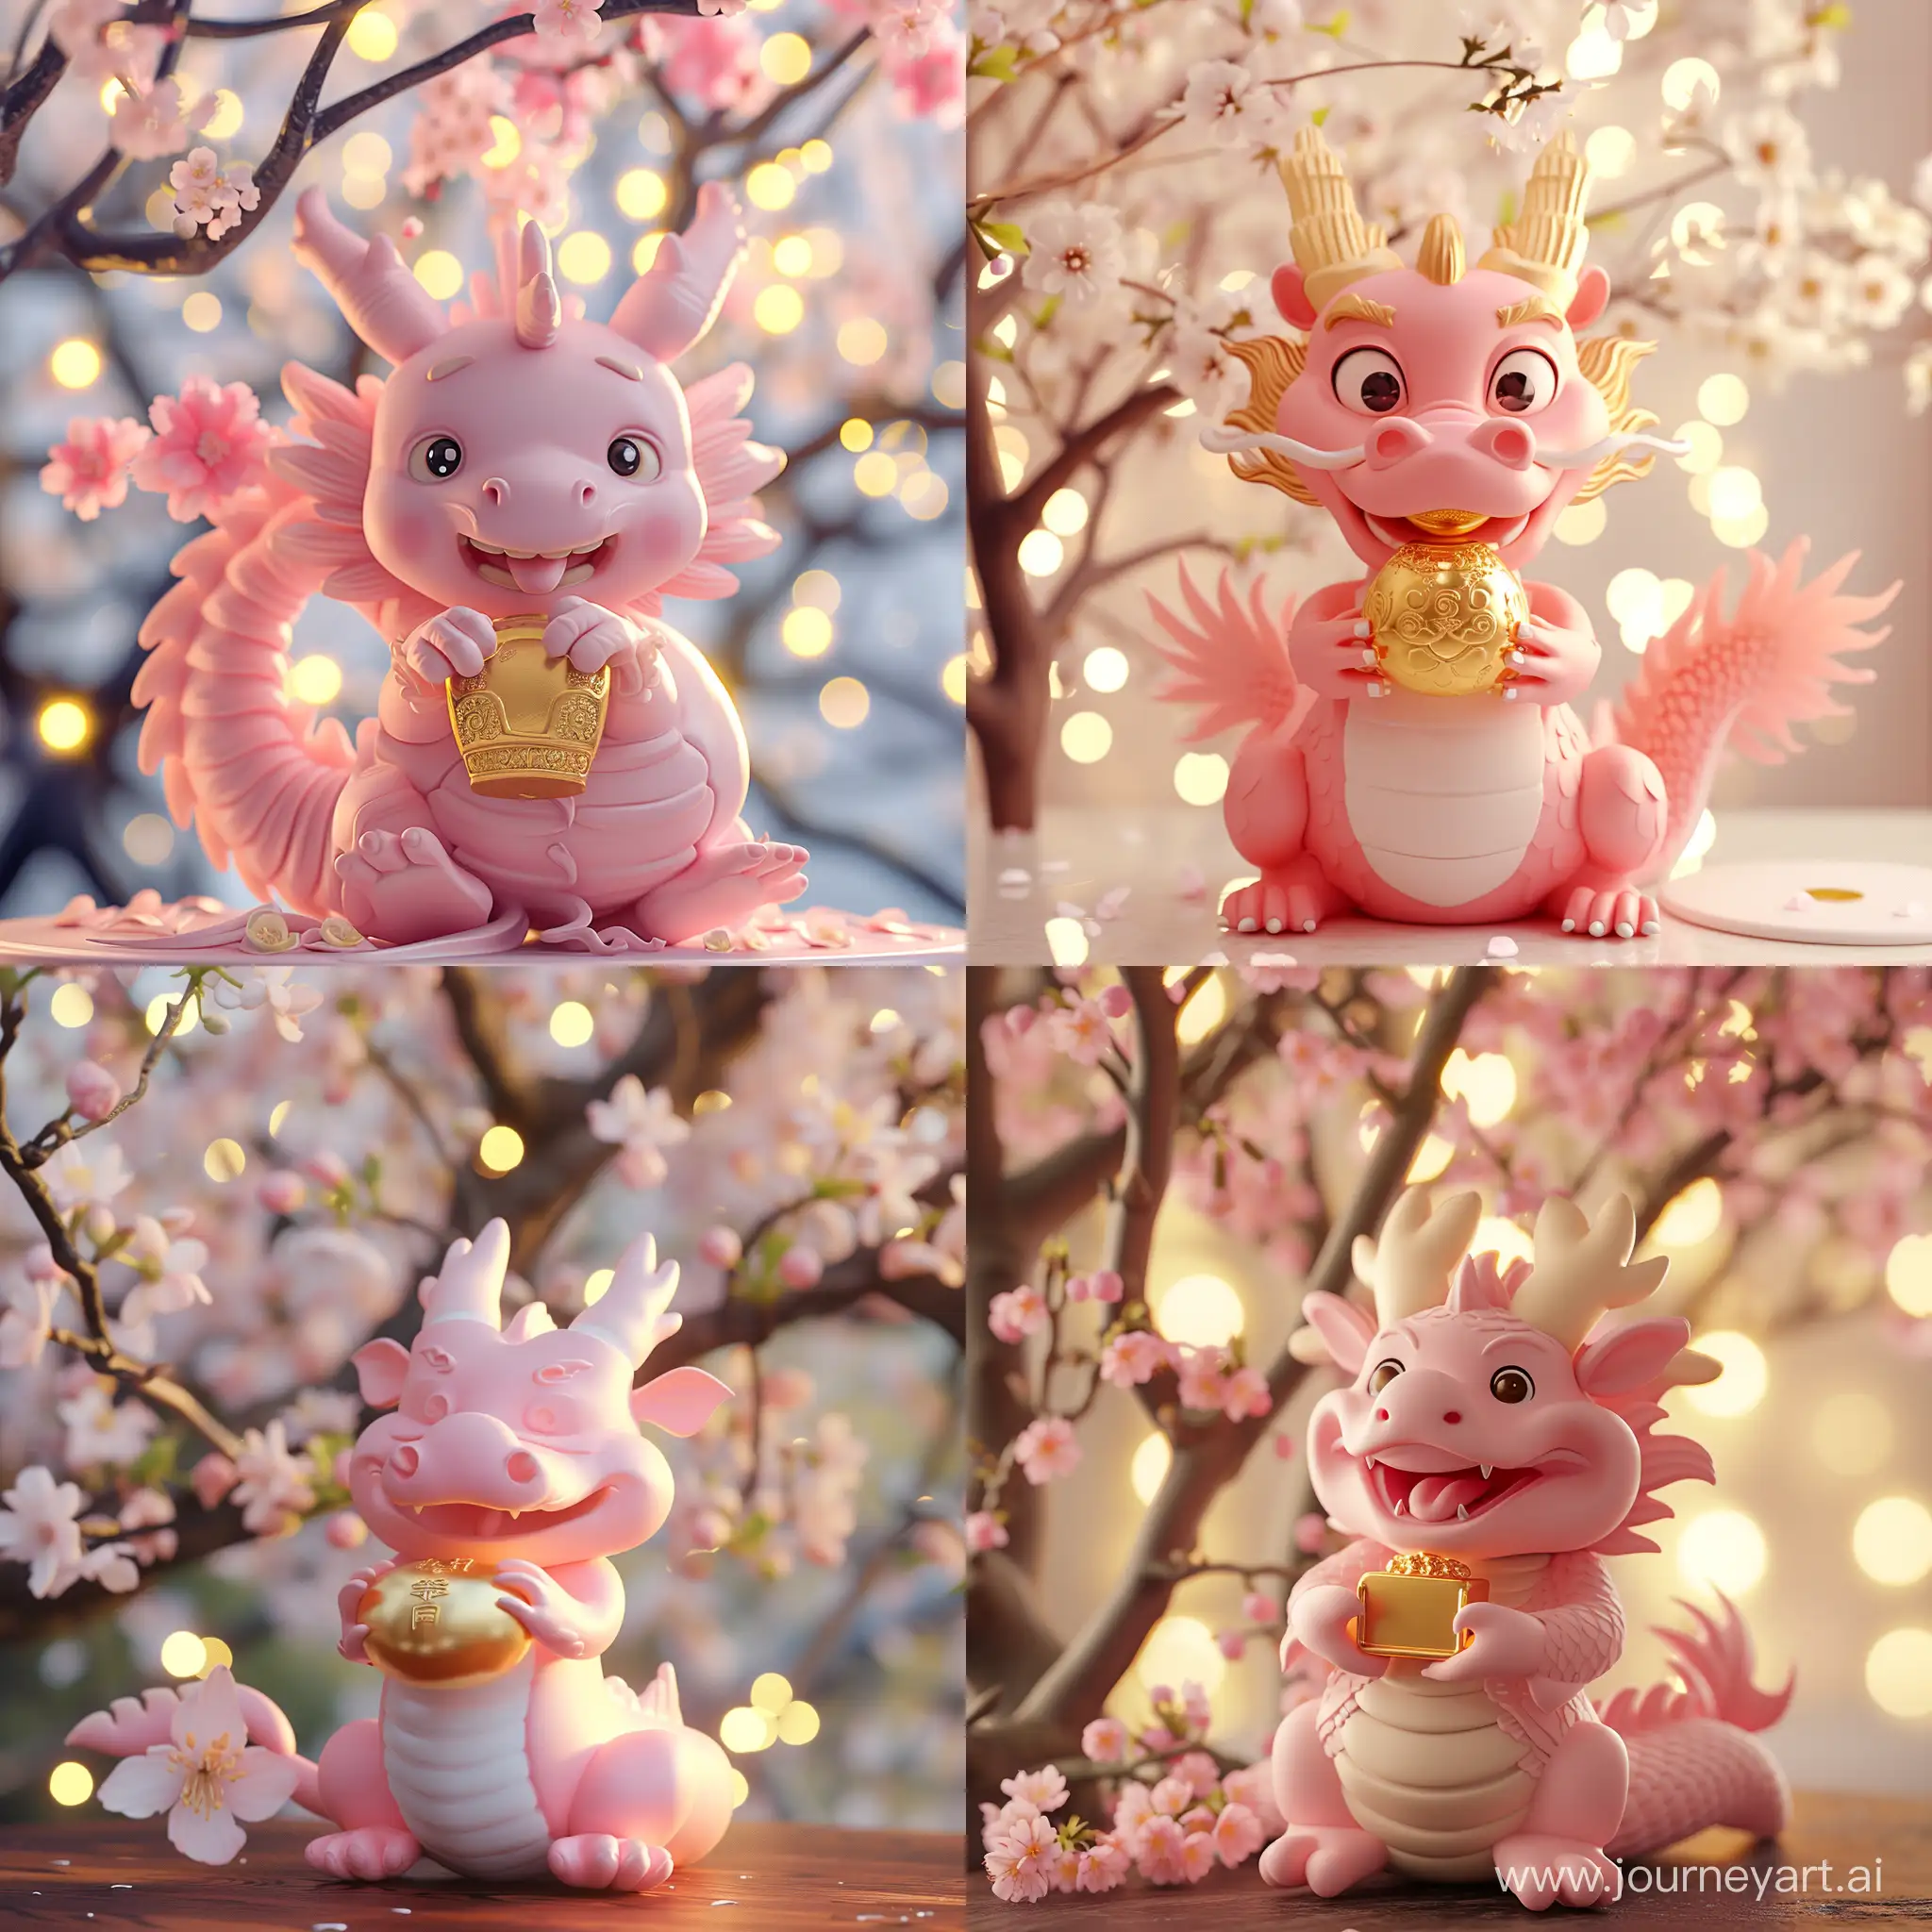 Pink Cute traditional 3D Chinese Dragon with gentle smile. Holds a gold ingot. Background bokeh spring blossoms.